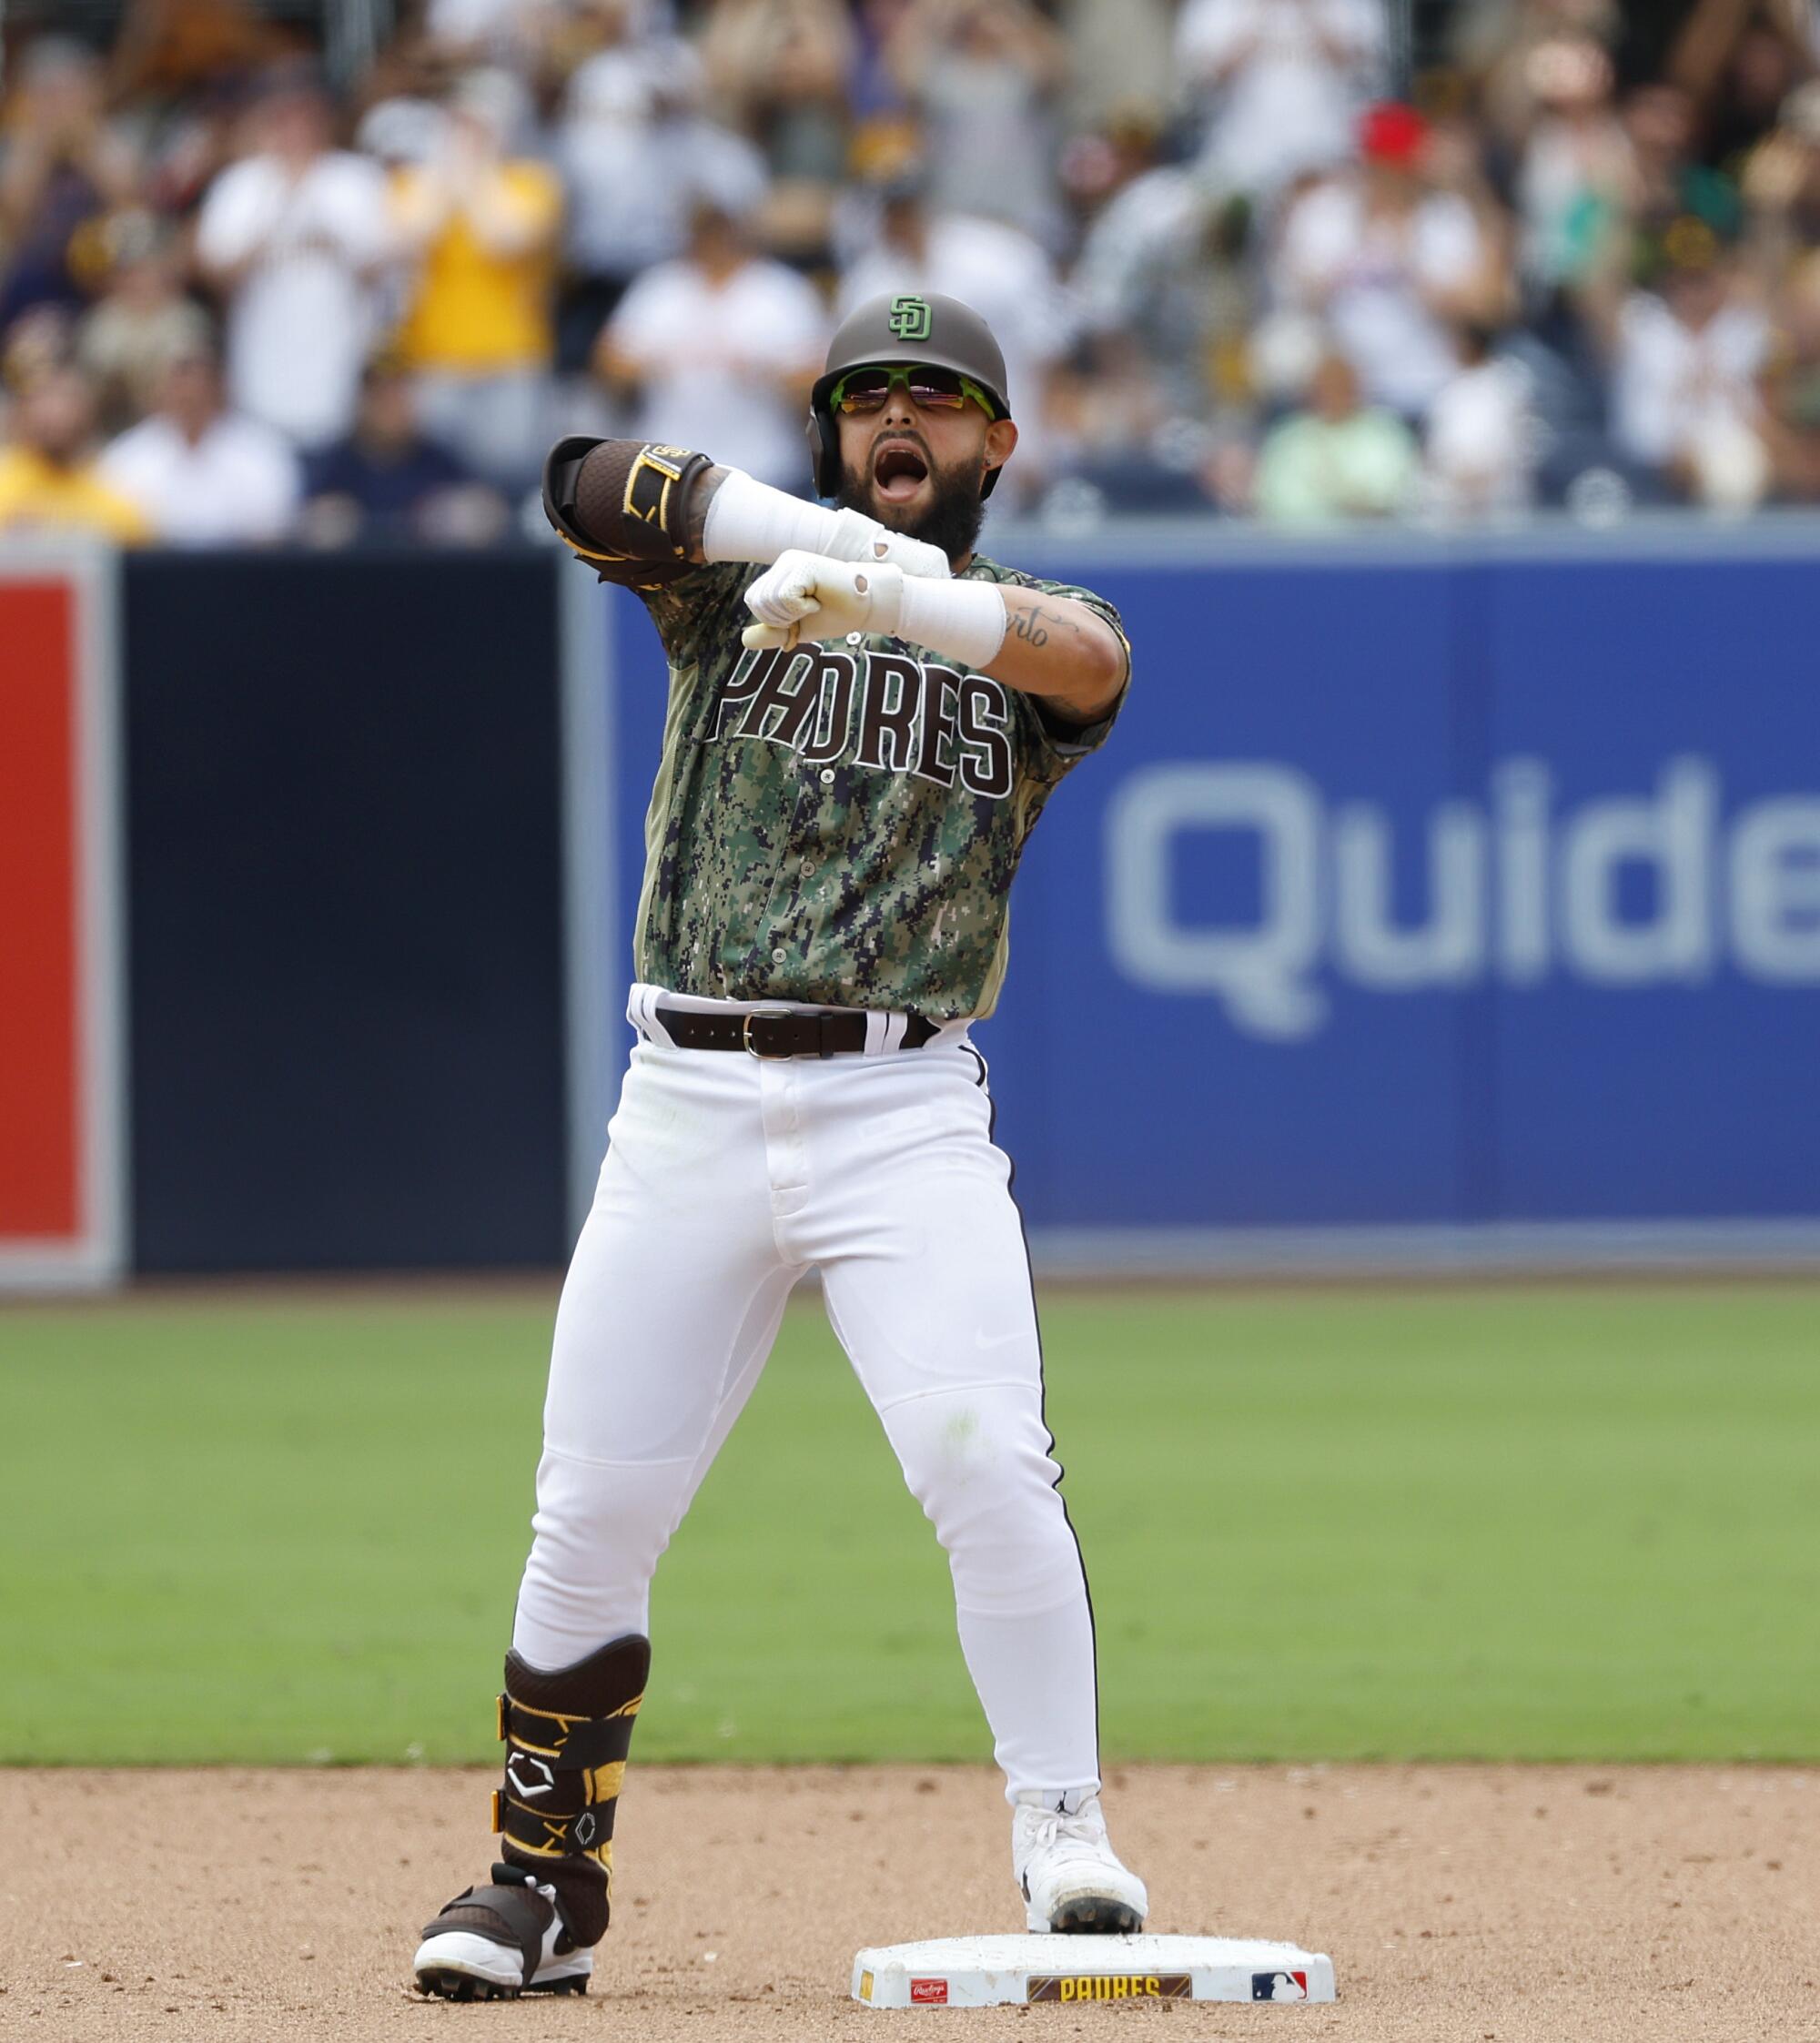 Why did the San Diego Padres sign Rougned Odor to a minor league